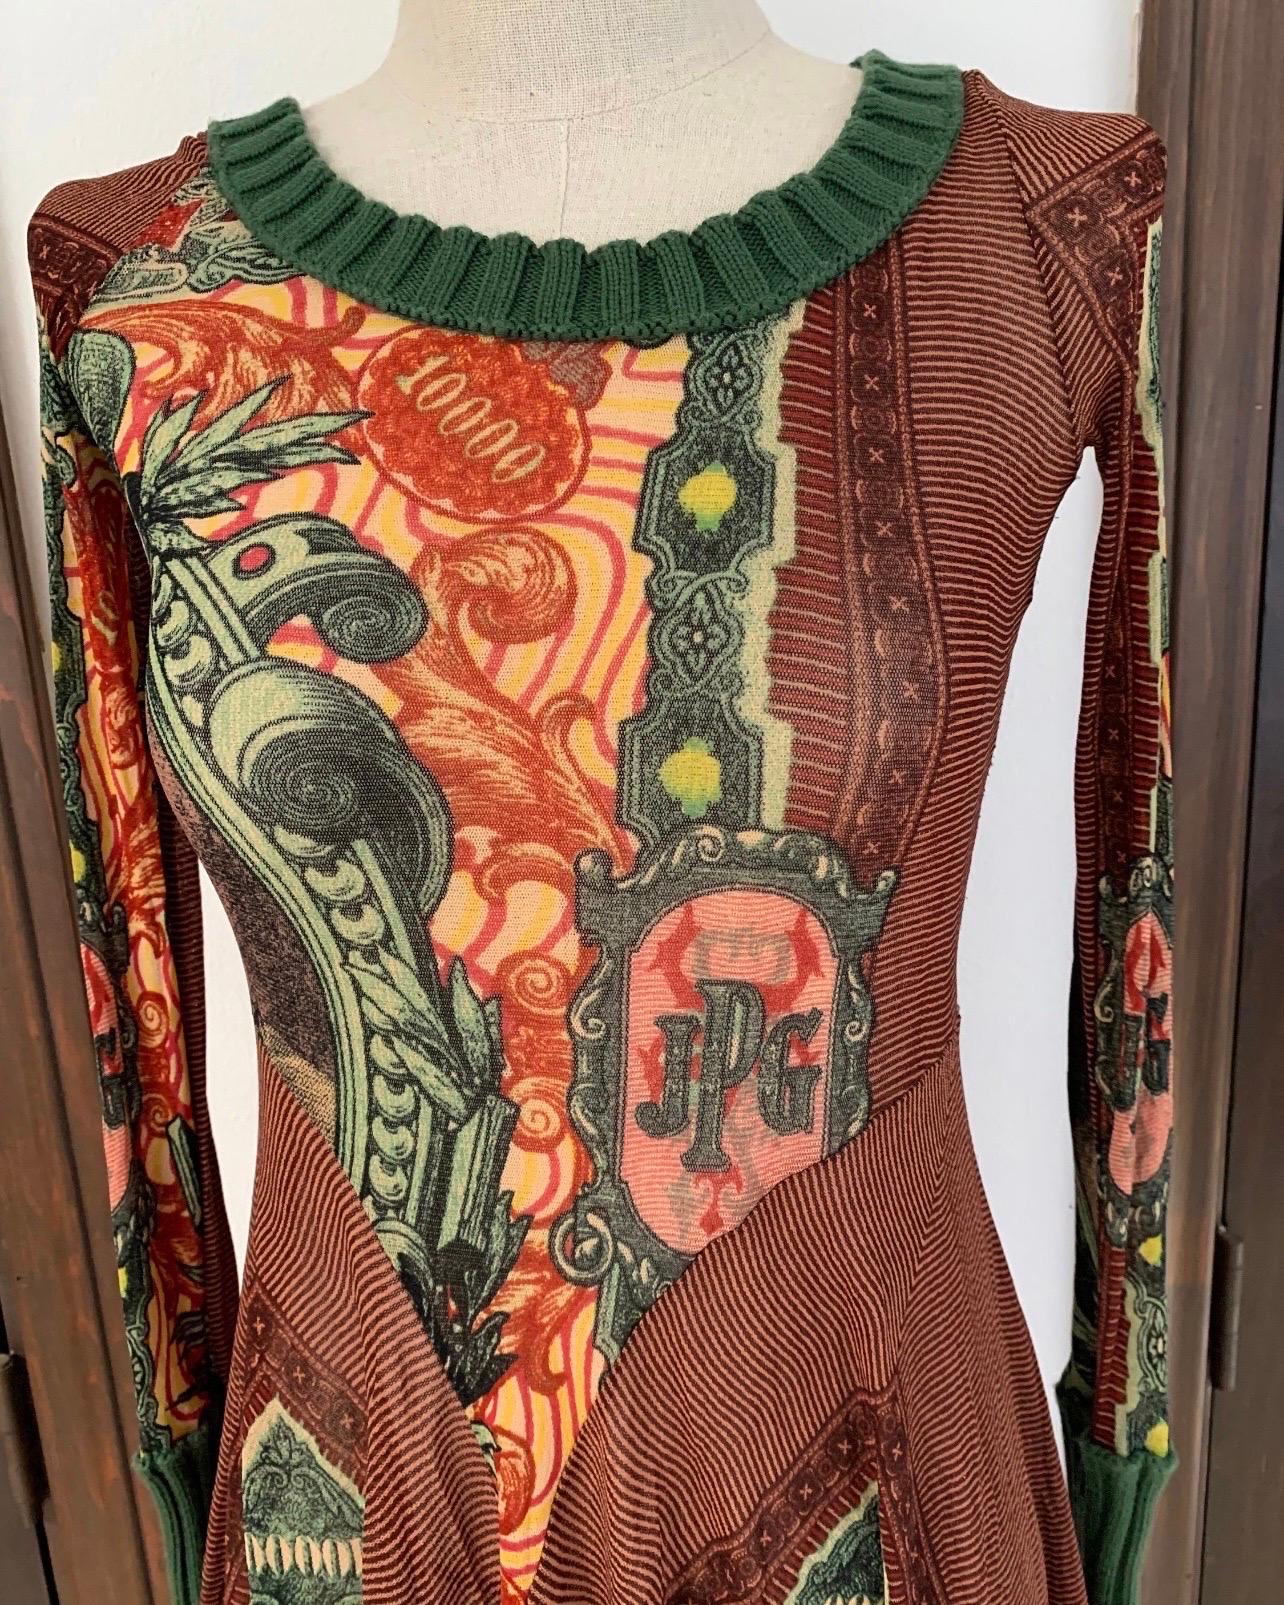 Jean Paul Gaultier Mesh iconic 1996 Caveman Money print dress. Knit trim, mesh layers and GAULTIER adorn the front and back of this timeless piece. 

This item is in excellent condition, appears to be unworn. 

Size S - L  2 - 8 US (very stretchy